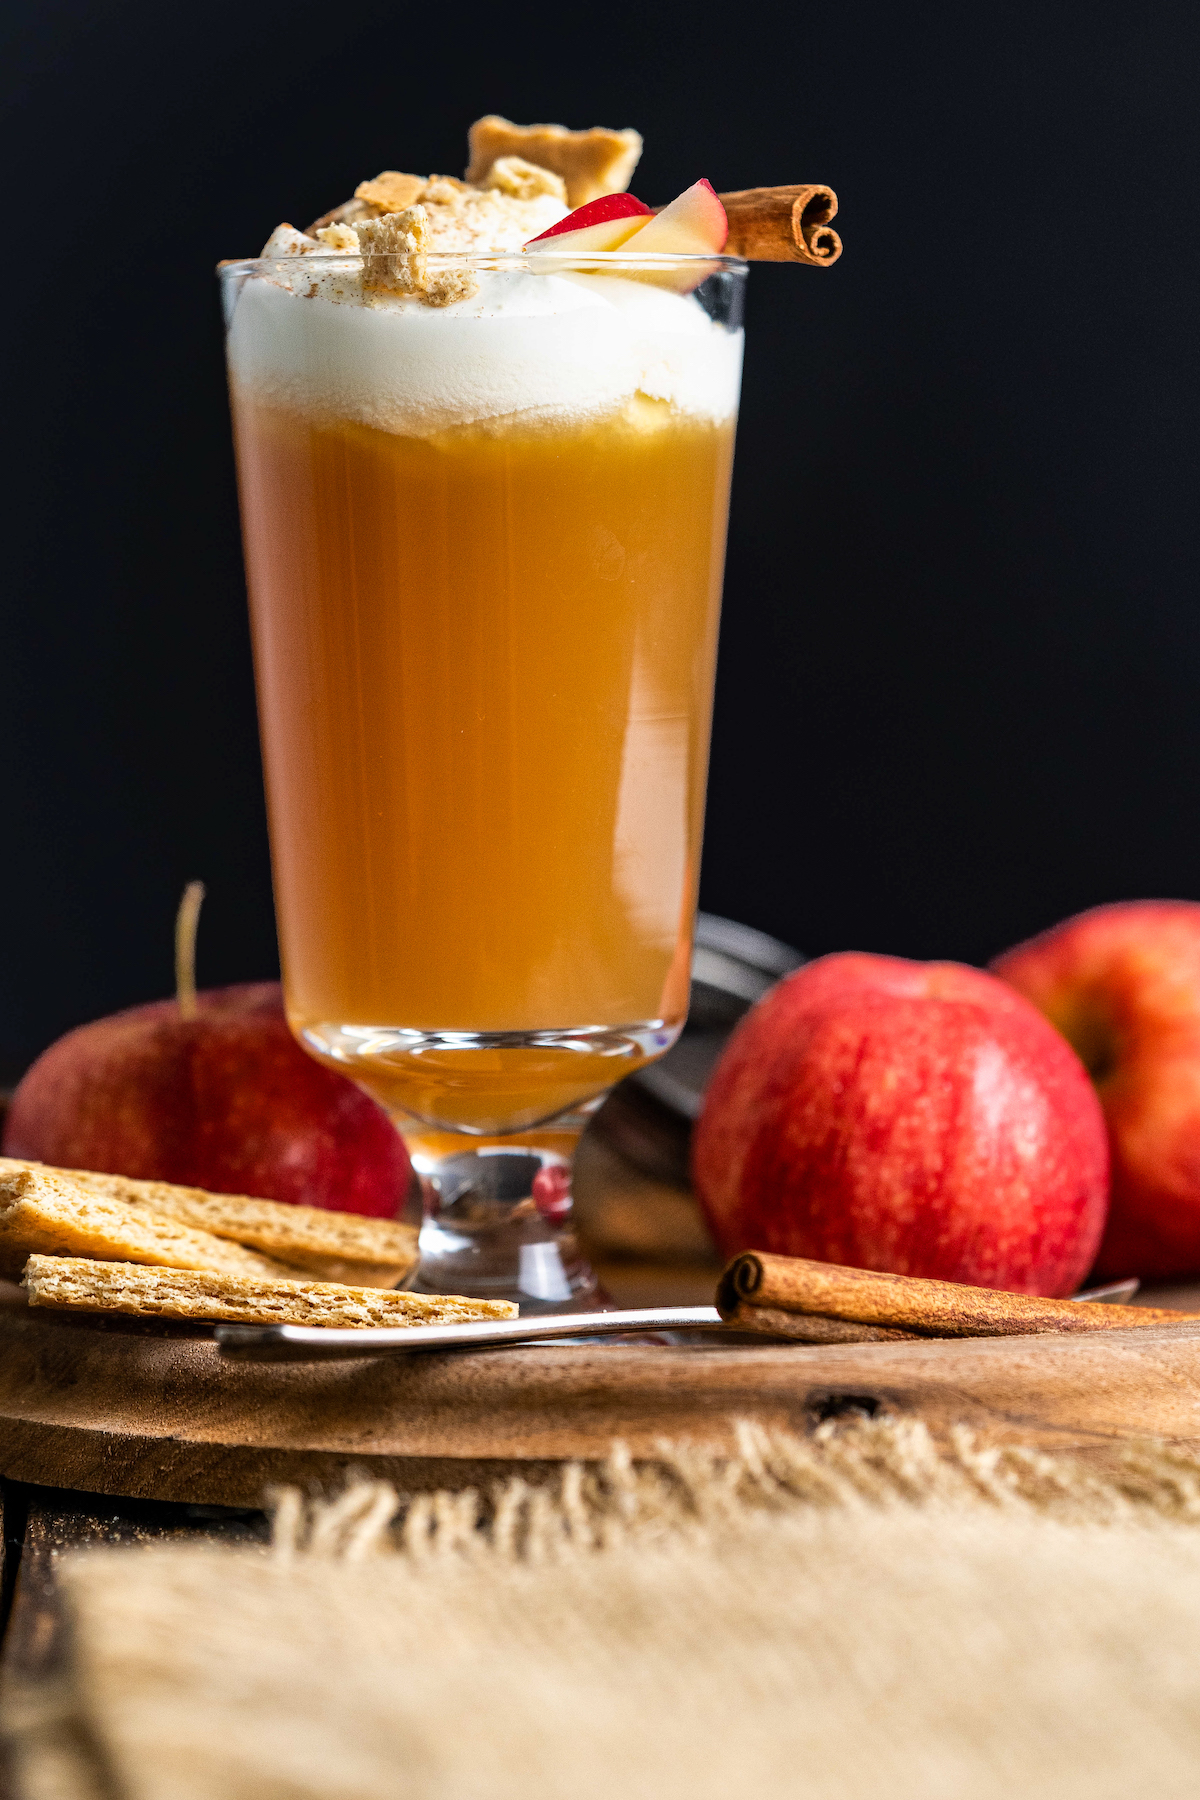 cocktail glass with apple cider and topped with whipped cream, apple slices, cinnamon, a piece of graham cracker and cinnamon stick alongside apples, graham crackers, and cinnamon sticks on a wooden platter